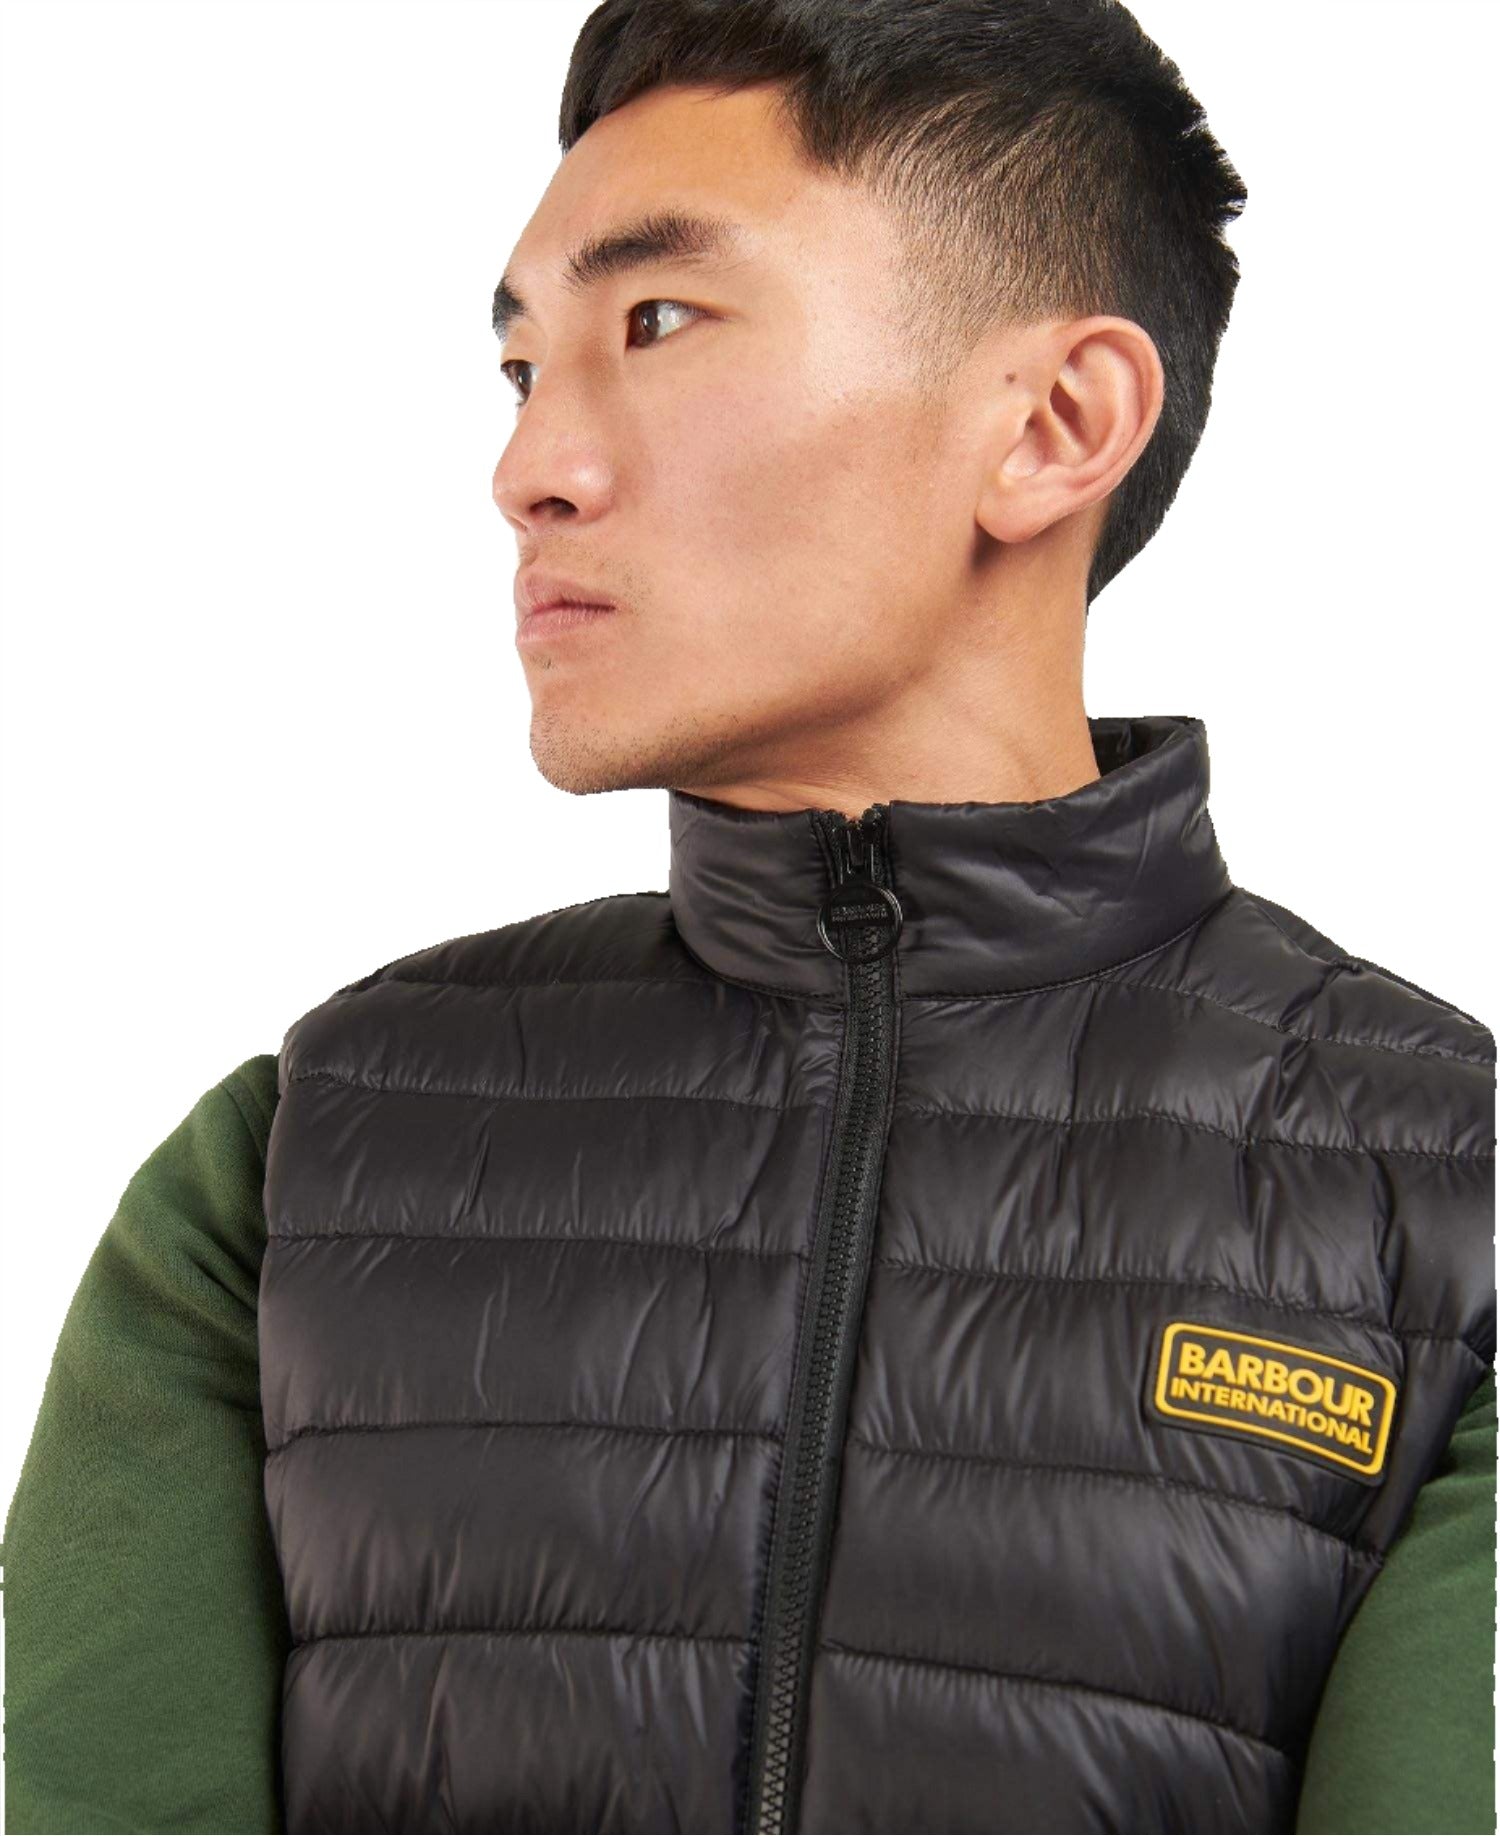 Barbour Racer Reed Gilet - The Luxury Promotional Gifts Company Limited